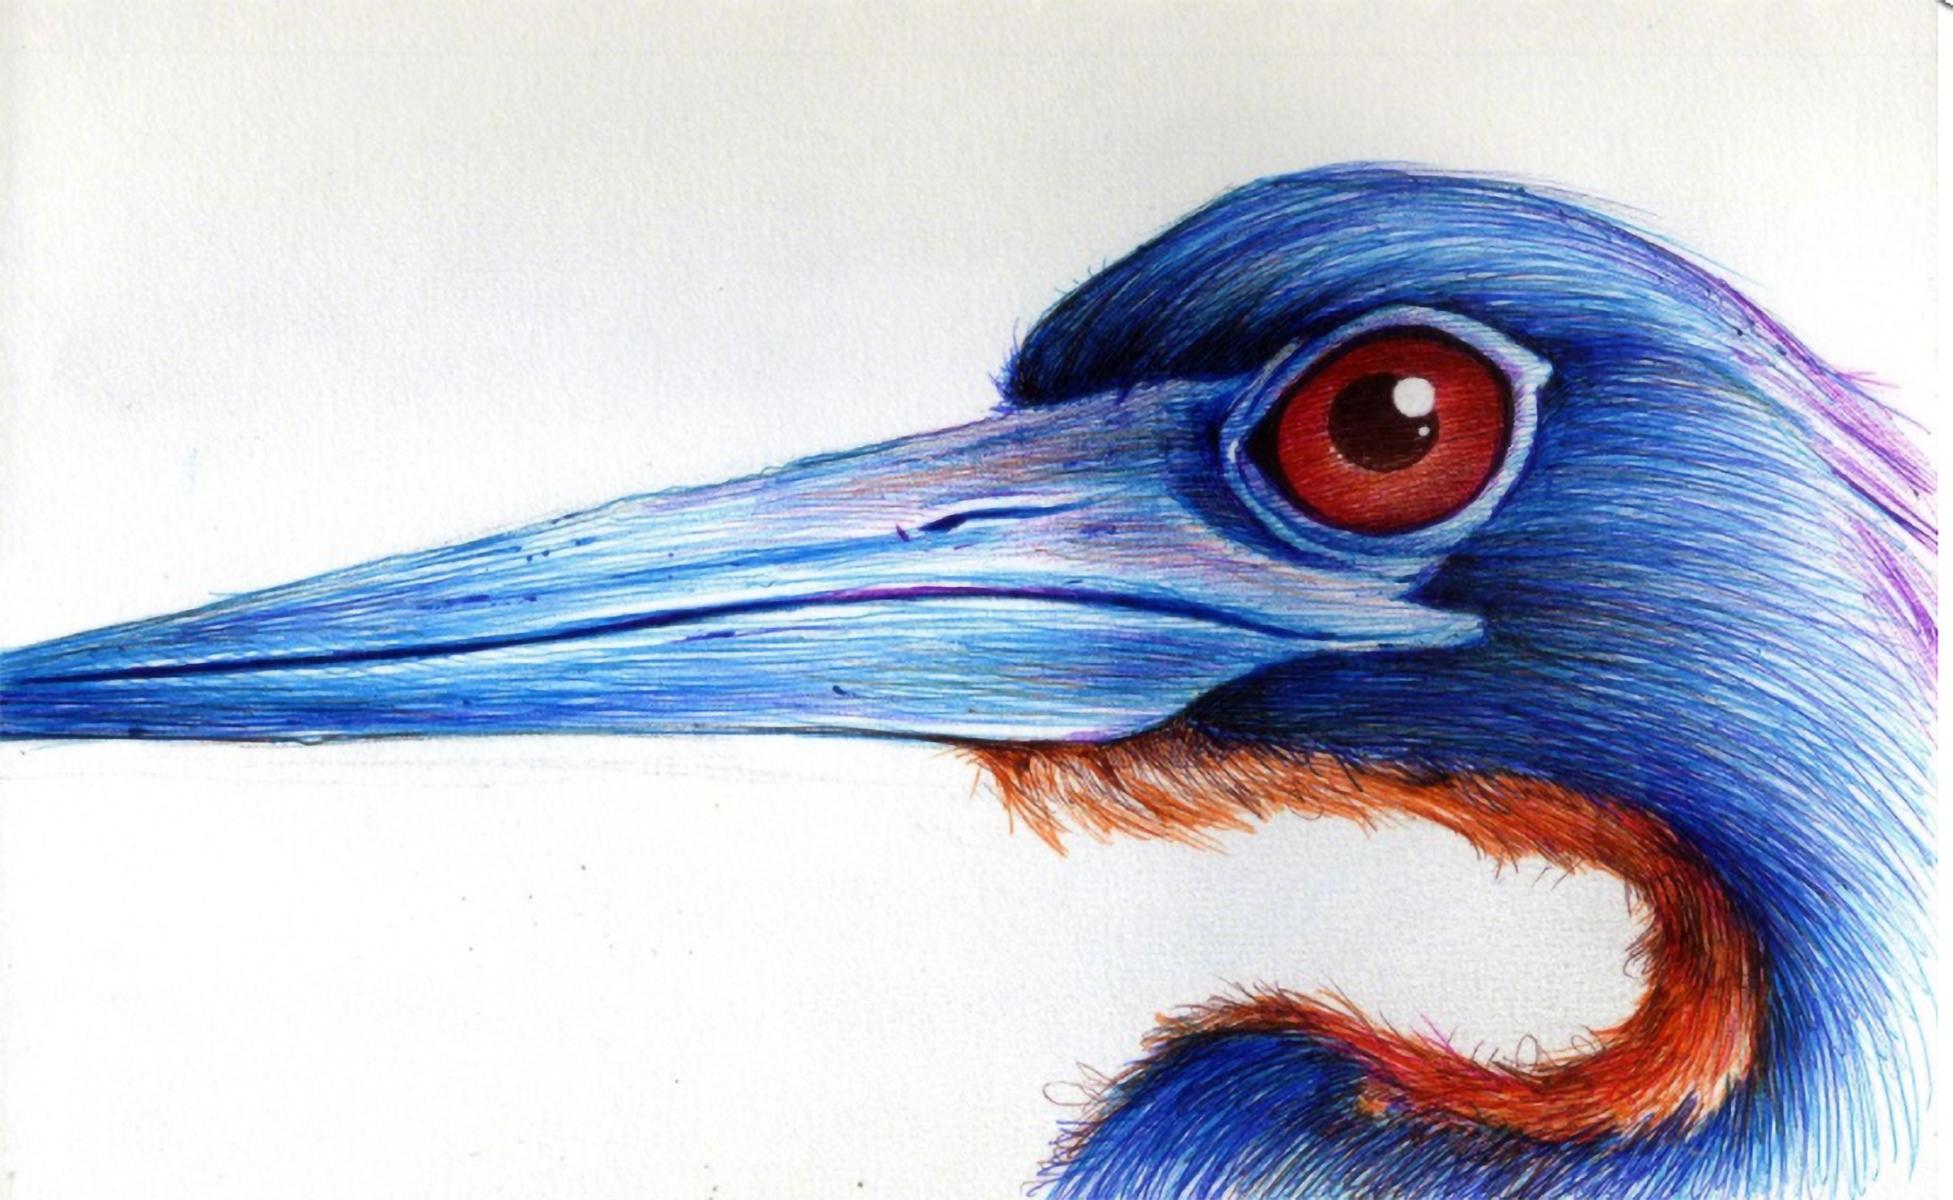 Long Necked (Blue with Red Eyes), 2018 - Mixed Media Art by Gigi Chen